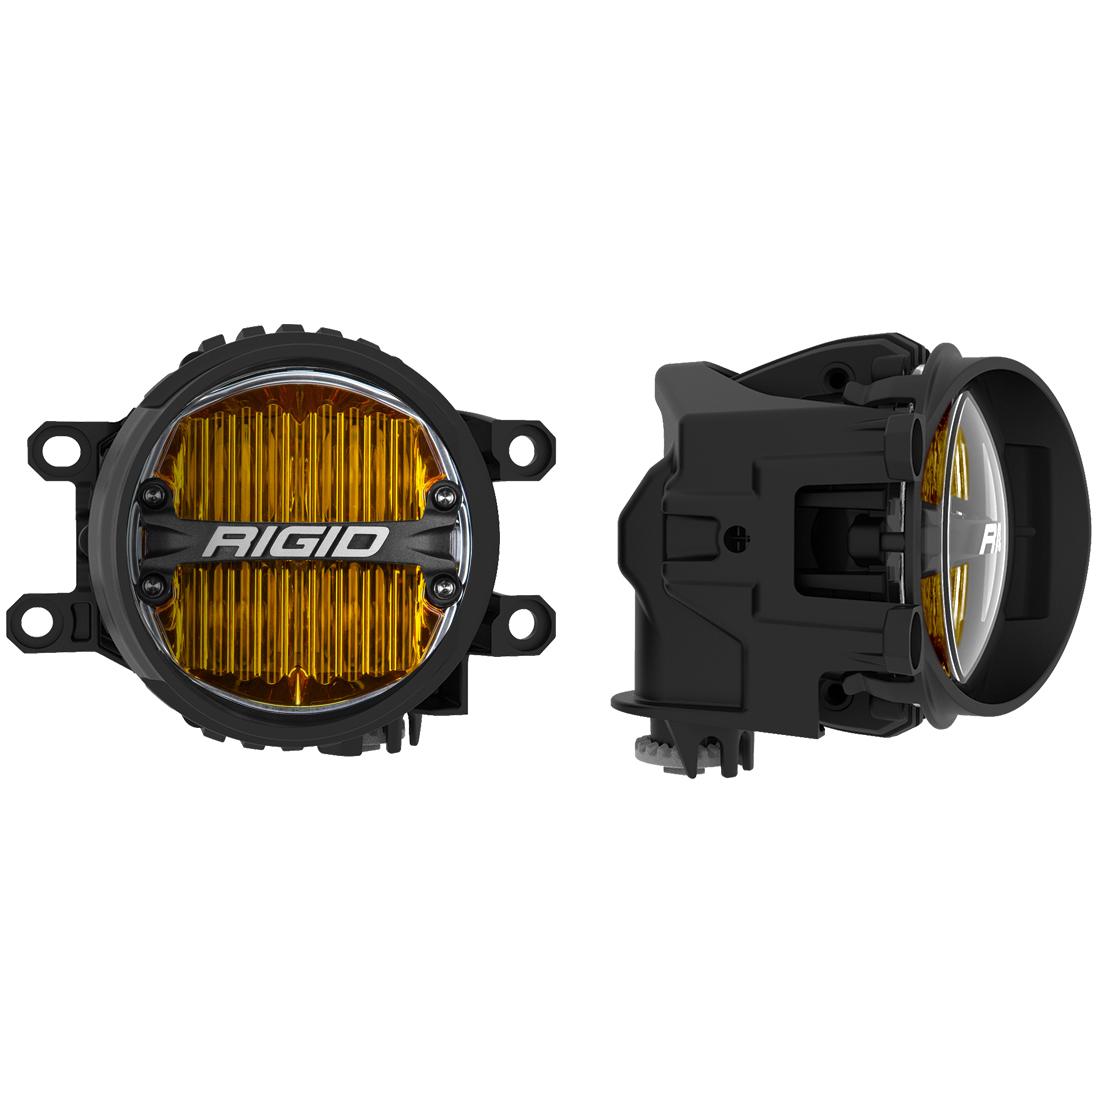 Rigid Toyota Fog Mount Kit For 10-20 Tundra/4Runner 16-20 Tacoma With 1 Set 360-Series 4.0 Inch SAE Yellow Lights RIGID Industries - 37117